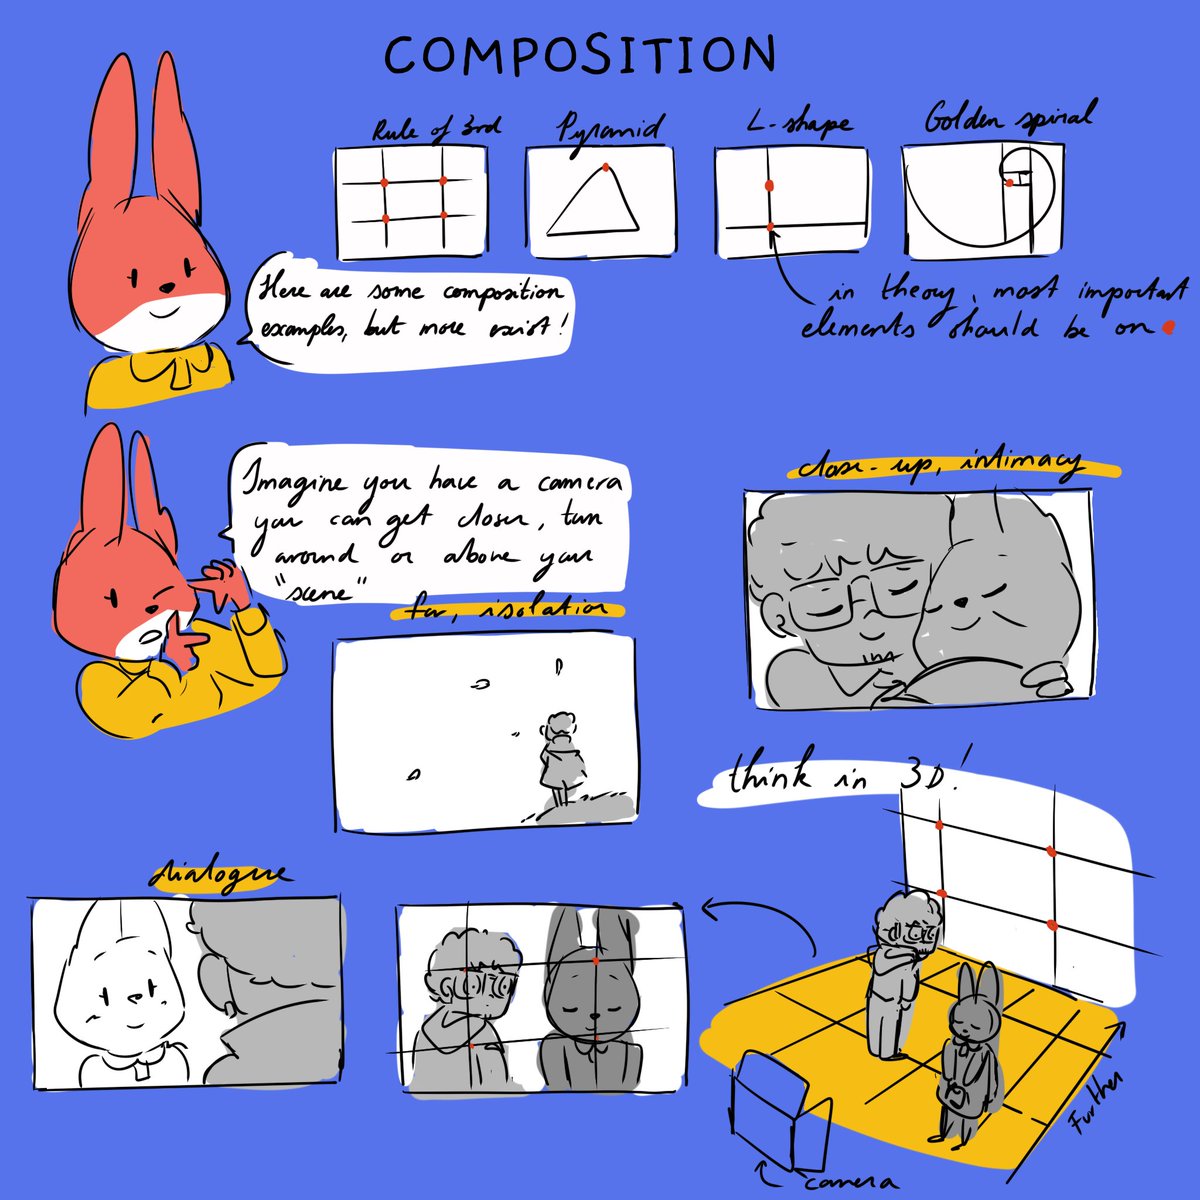 As it's learnuary, i tried to summarize some of my fav composition tips. I have learnt them from storyboarding/railroads for illustrated books